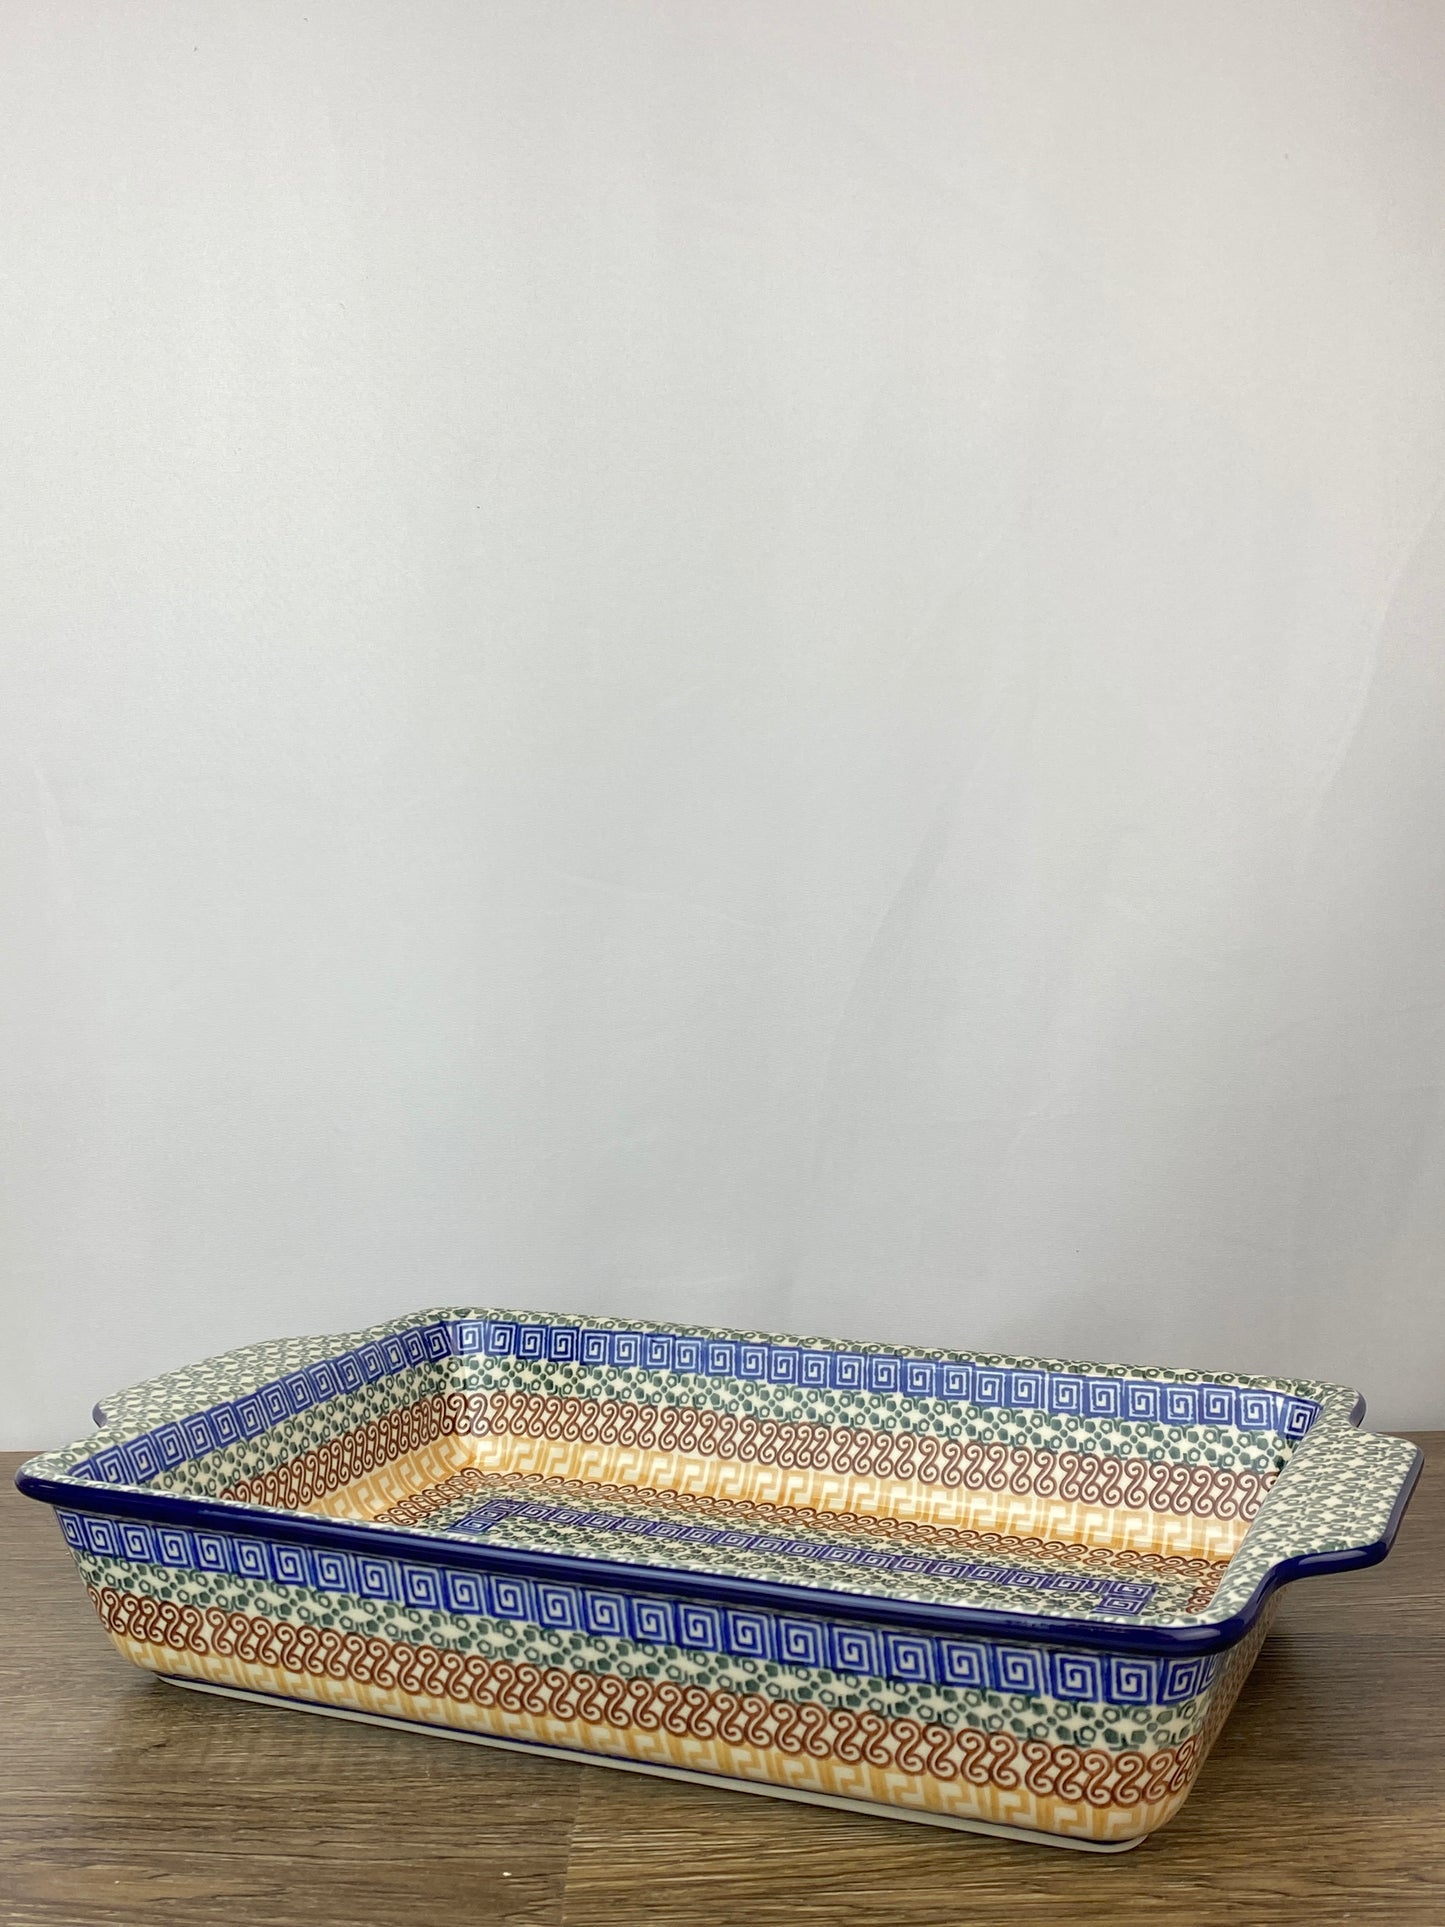 Large Rectangular Baker with Handles - Shape A56 - Pattern 50